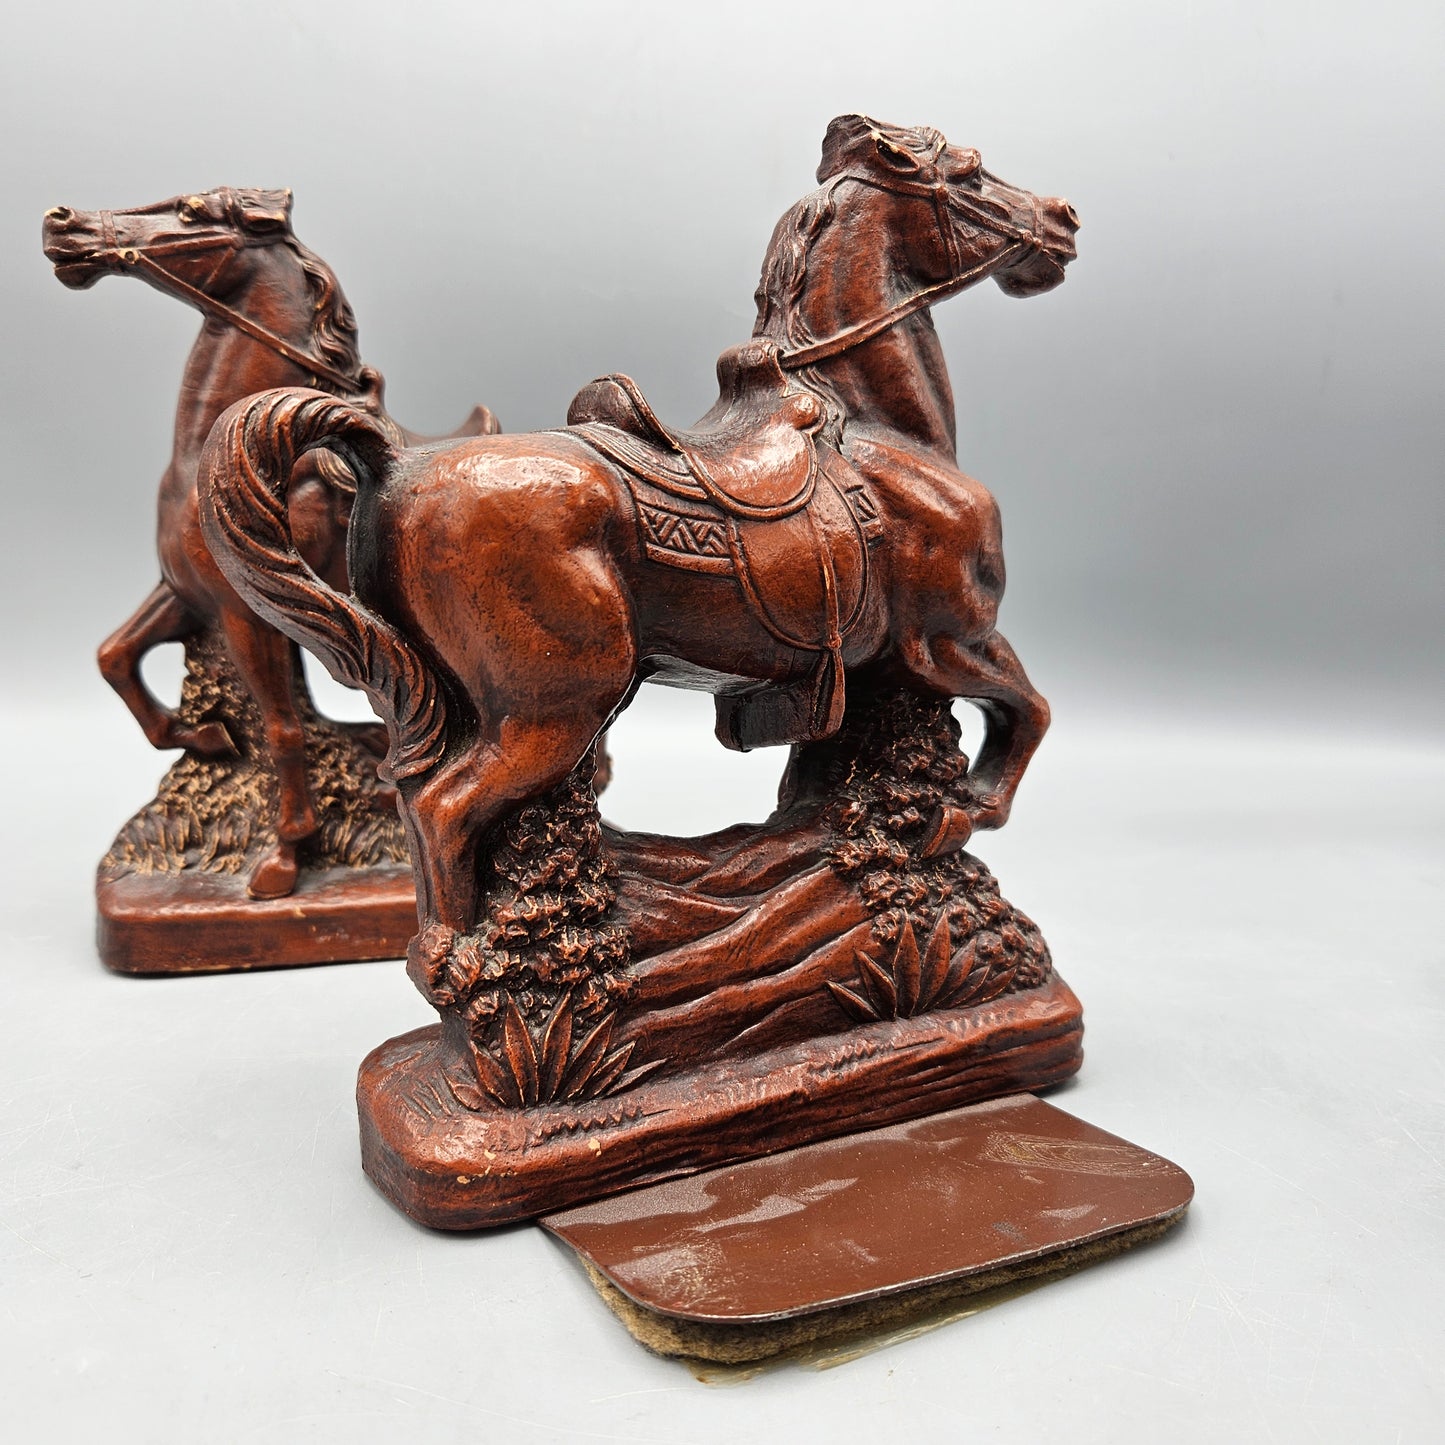 Pair of Vintage Resin Horse Bookends